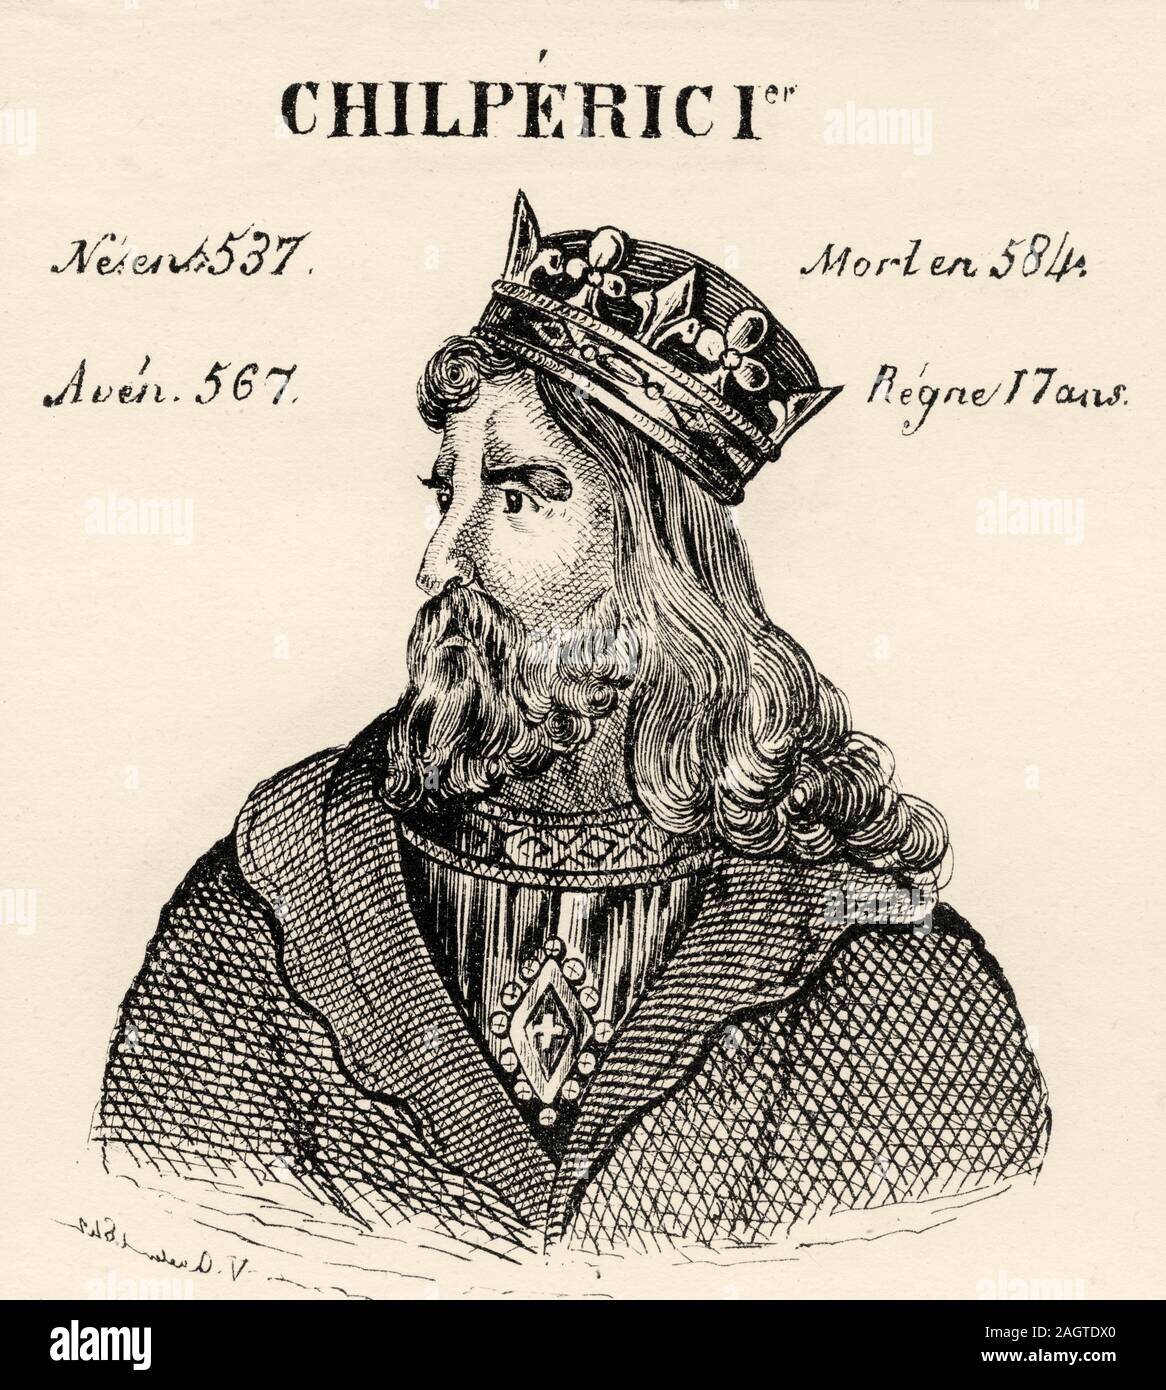 Portrait of Chilperic I (537 - 584). King of France from 567 to 584. Merovingian Dynasty. History of France, from the book Atlas de la France 1842 Stock Photo